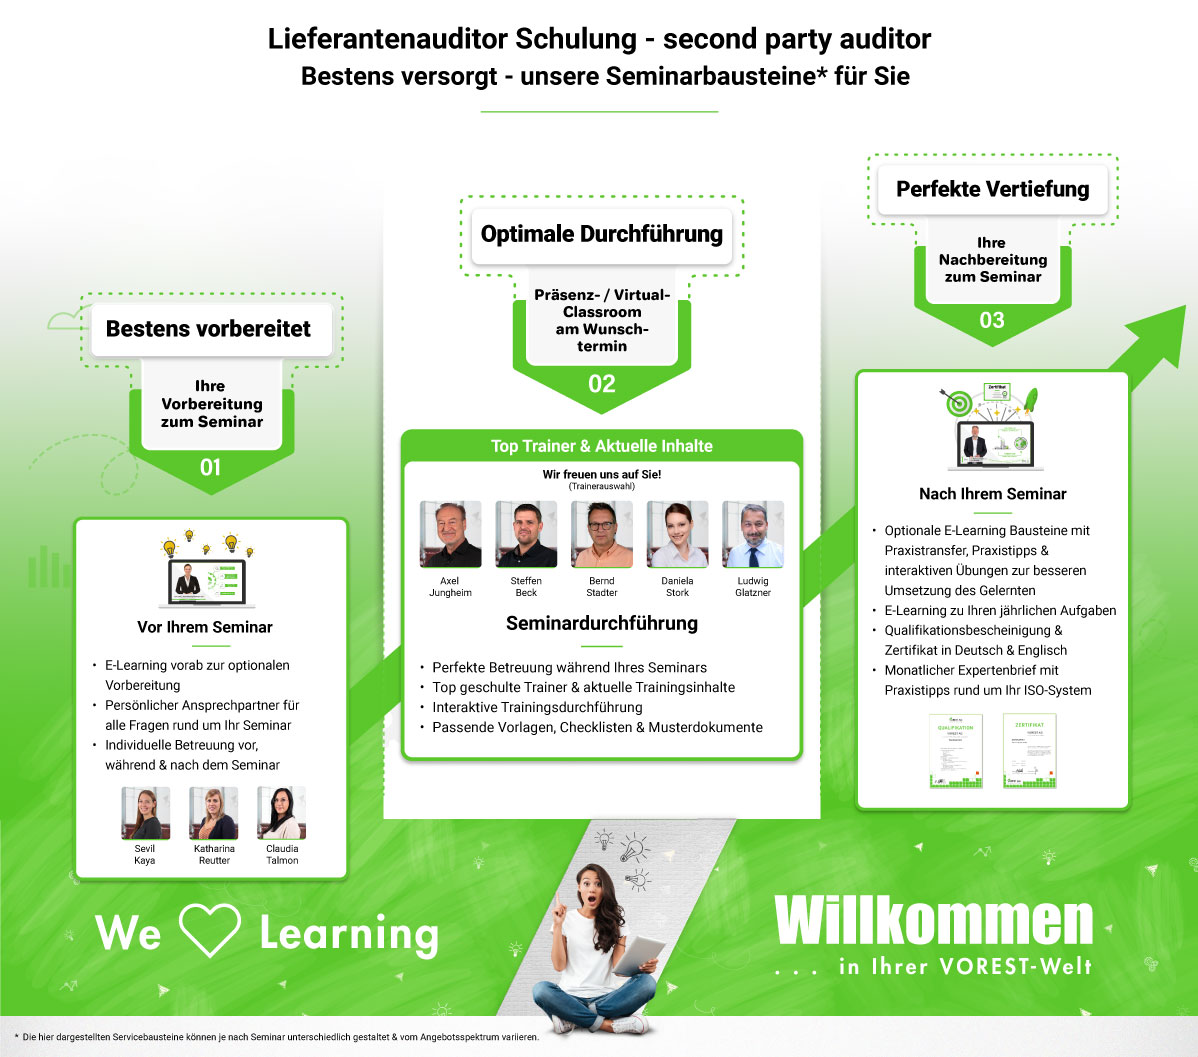 Lieferantenauditor Schulung - second party auditor